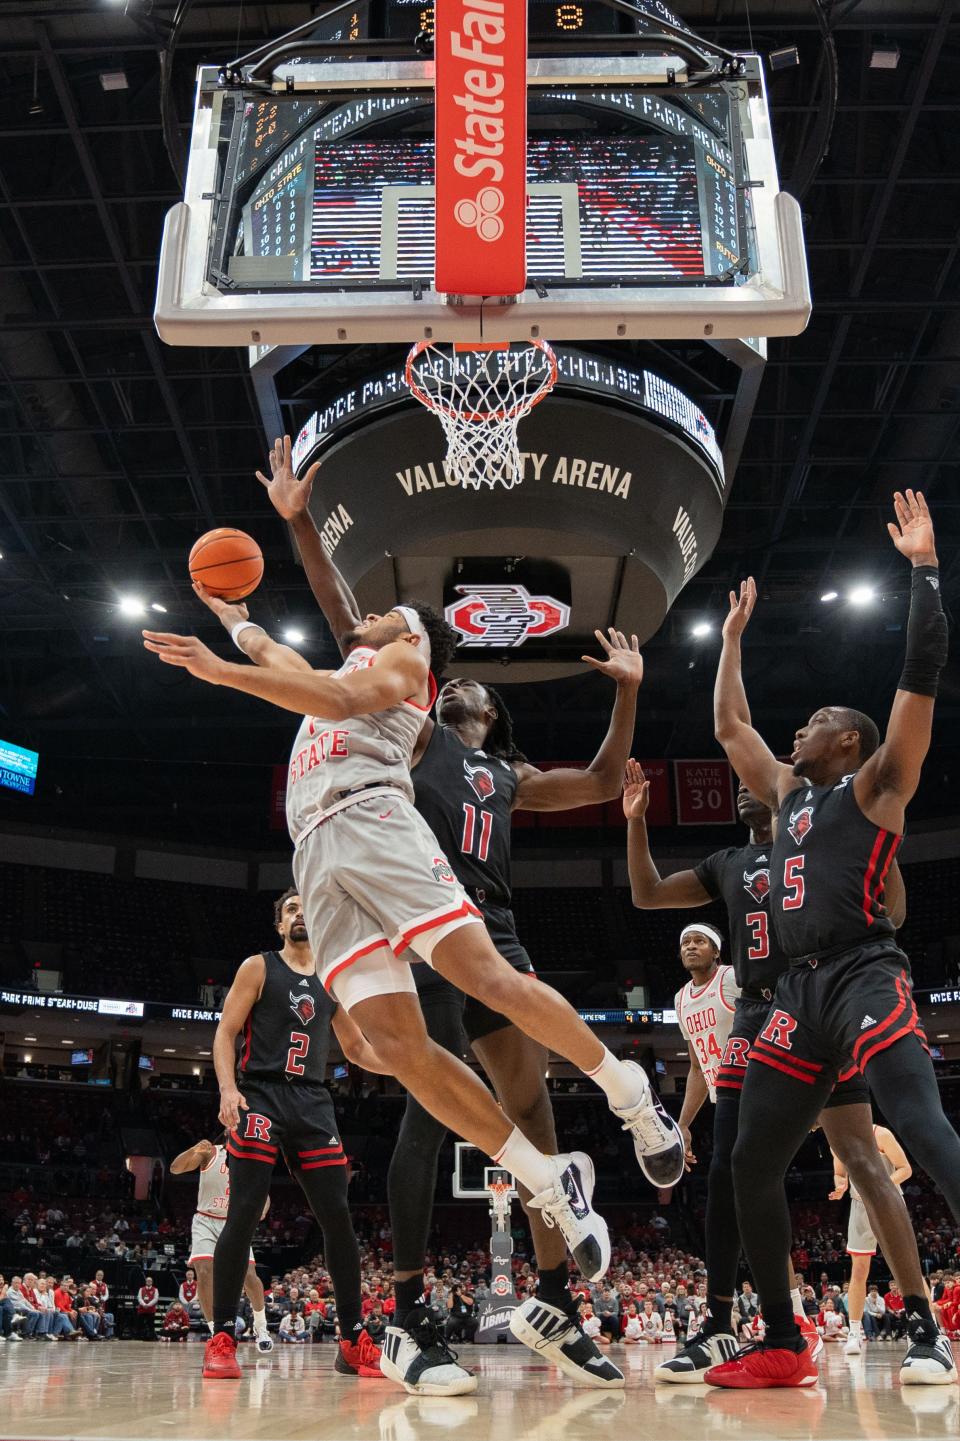 Jan 3, 2024; Columbus, OH, USA;
Ohio State Buckeyes guard Roddy Gayle Jr. (1) goes for a layup against Rutgers Scarlet Knights center Clifford Omoruyi (11) during their game on Wednesday, Jan. 3, 2024 at Value City Arena.